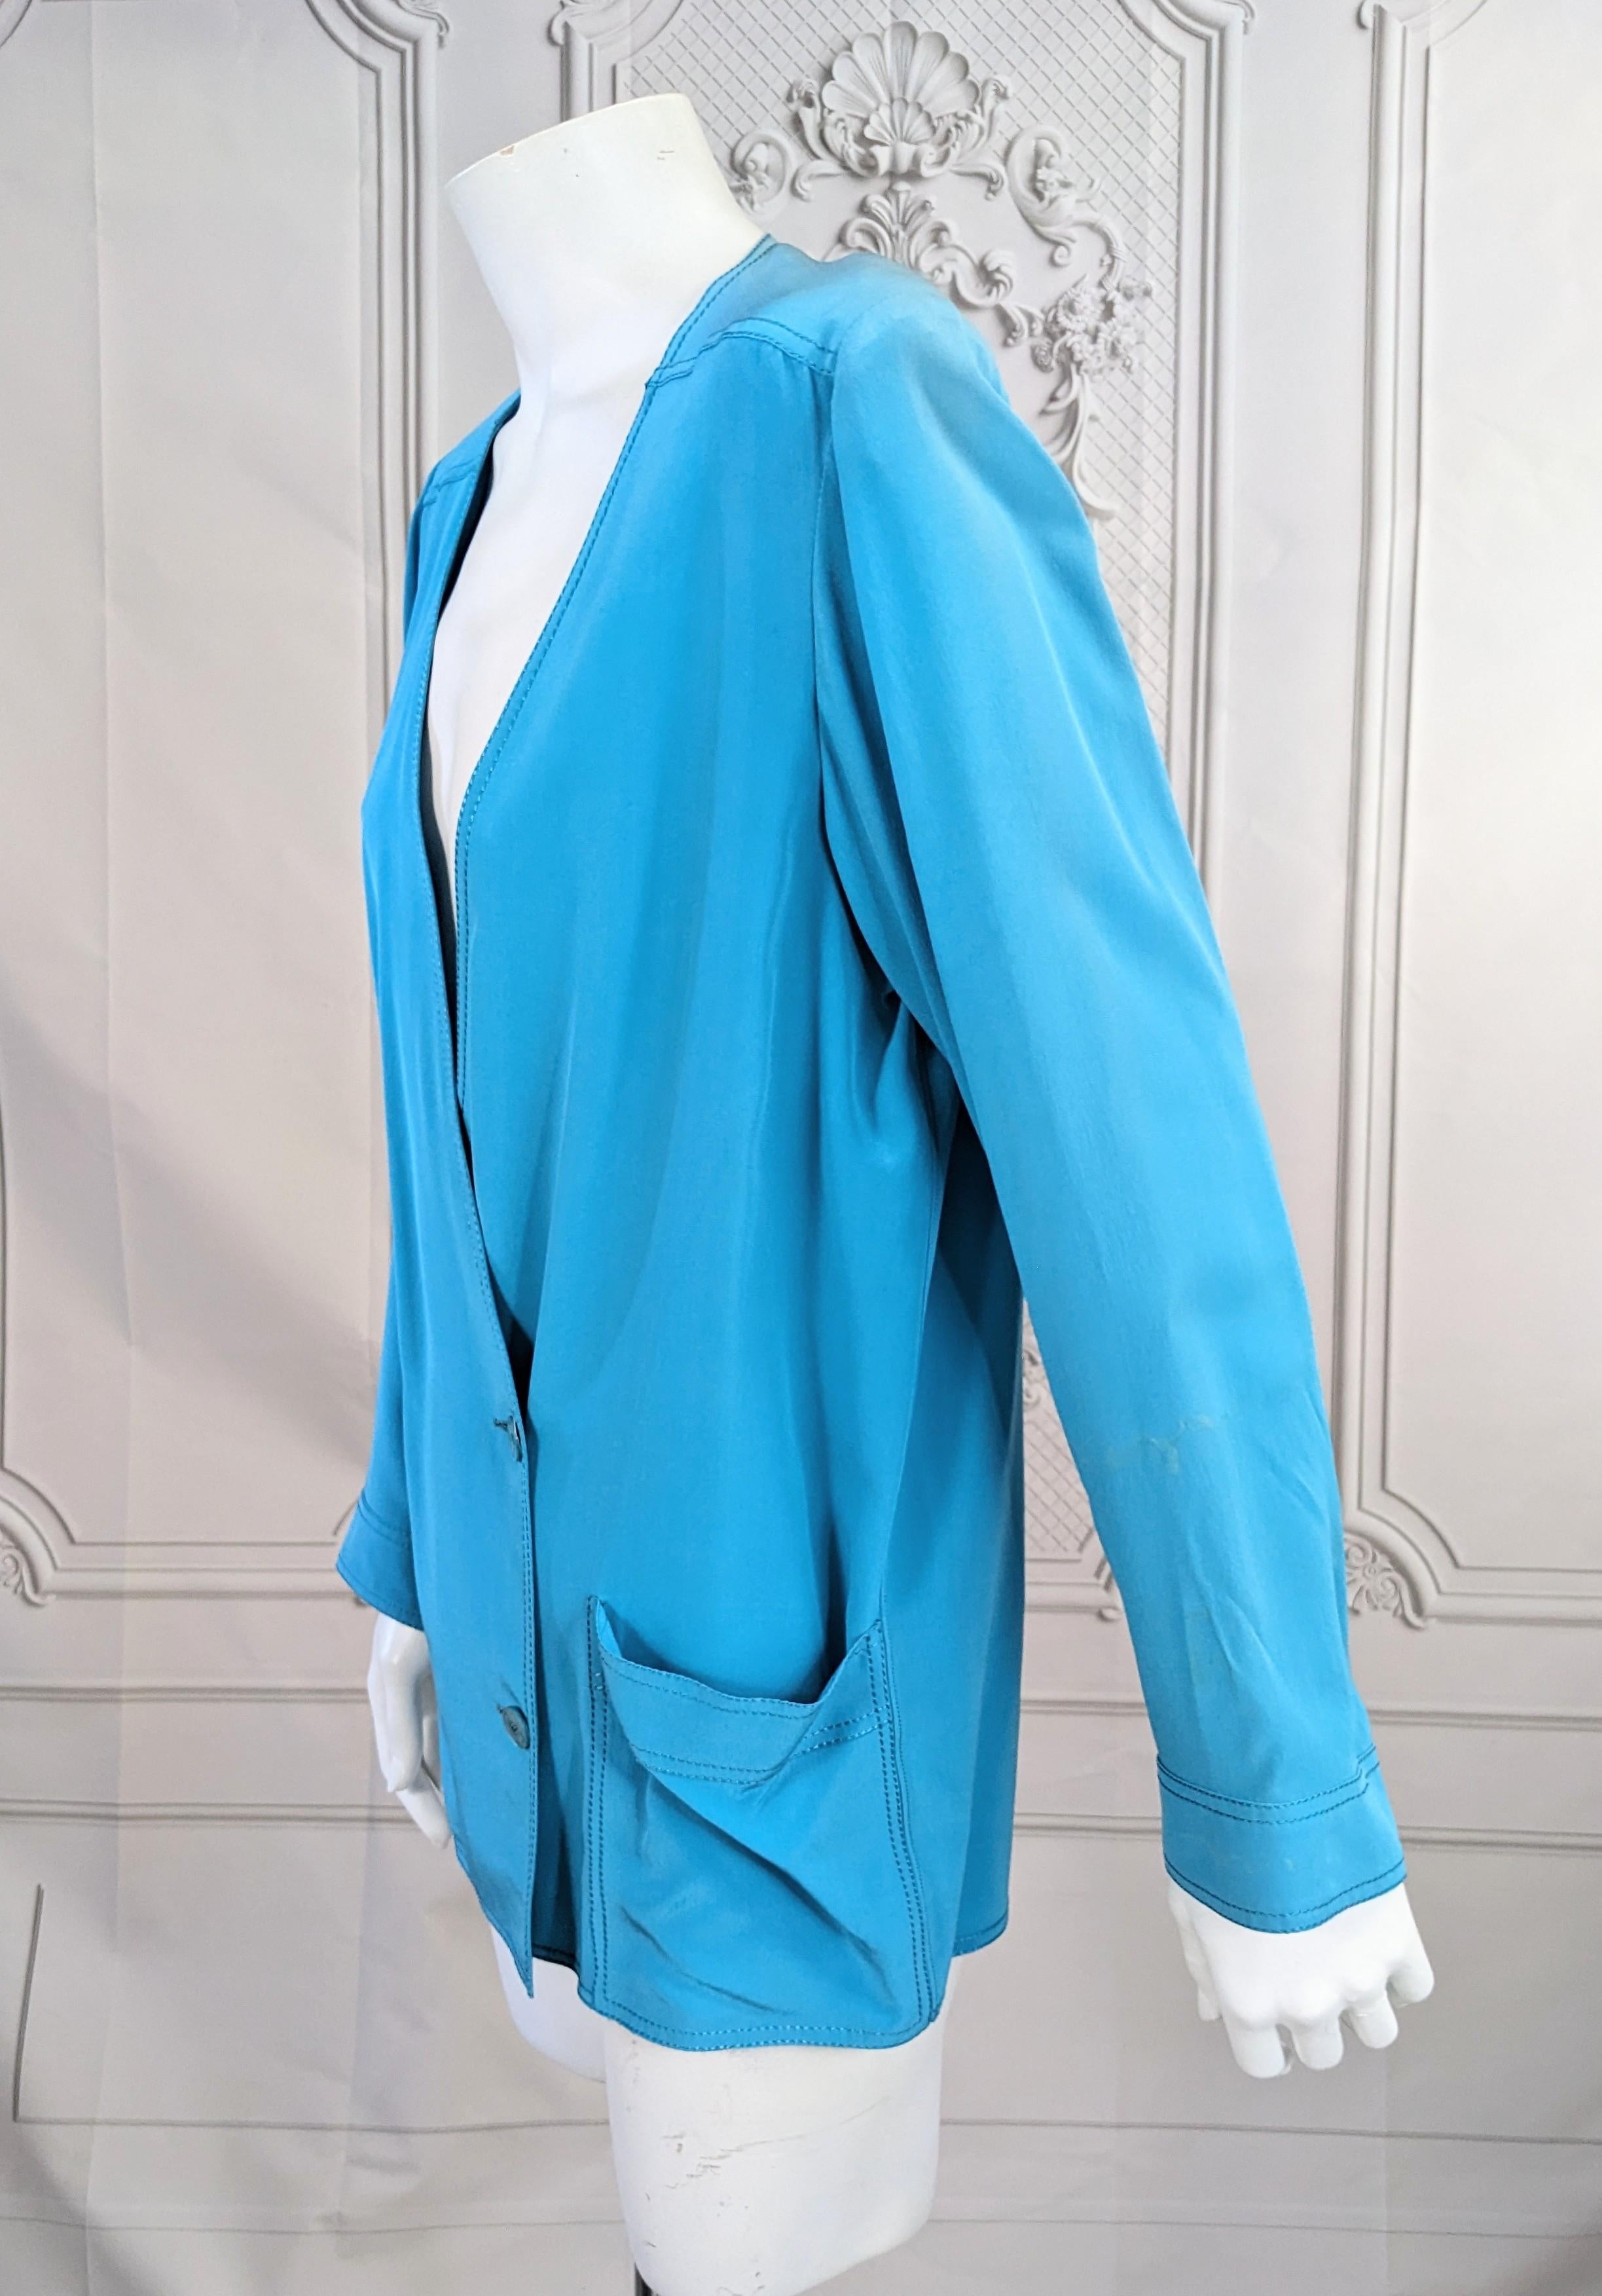 Chanel Silk Crepe Blouse In Good Condition For Sale In New York, NY